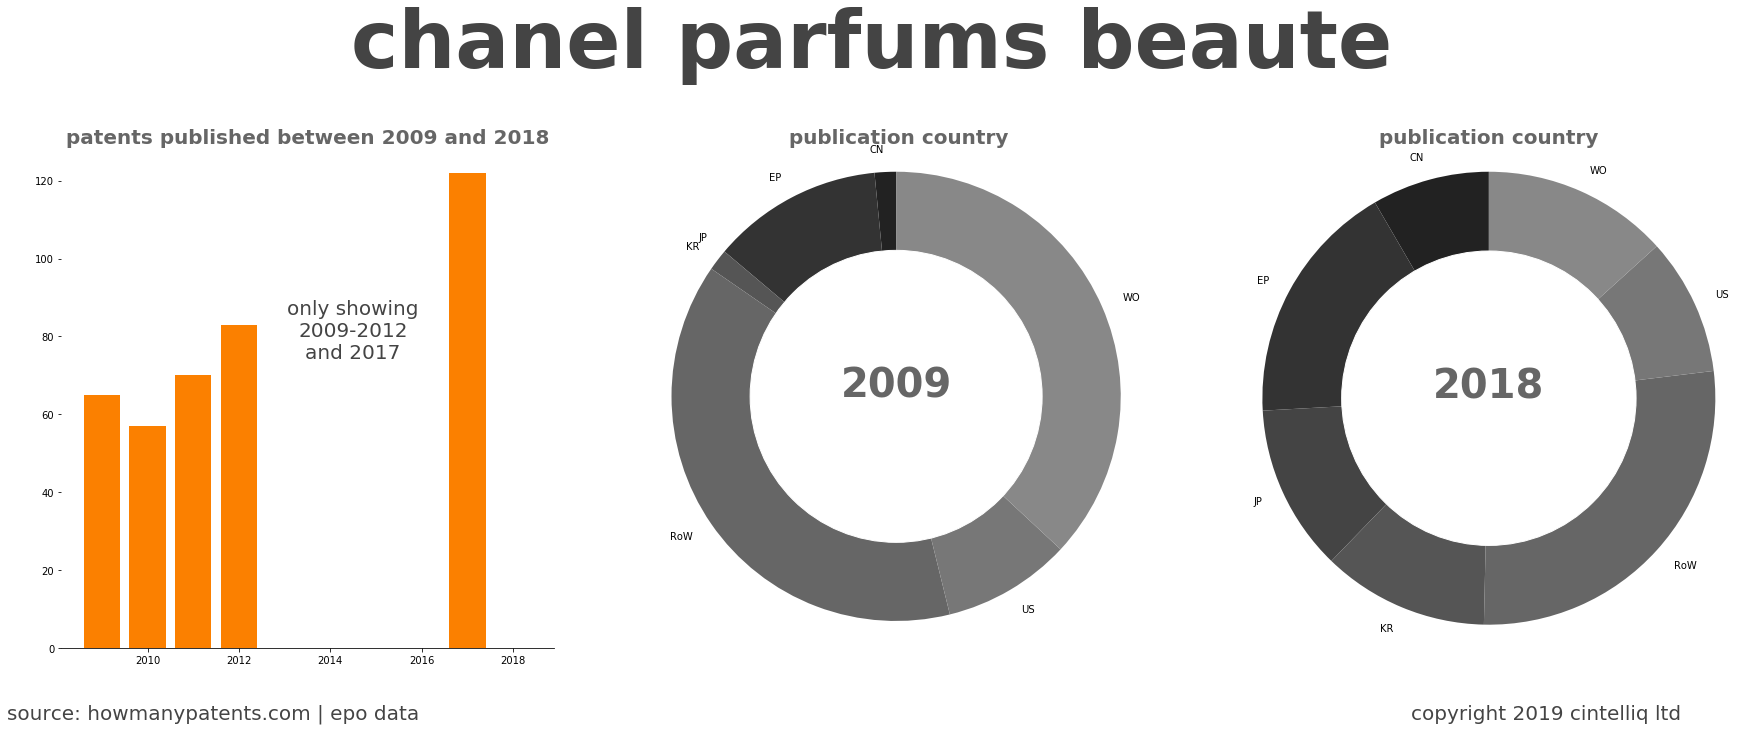 summary of patents for Chanel Parfums Beaute